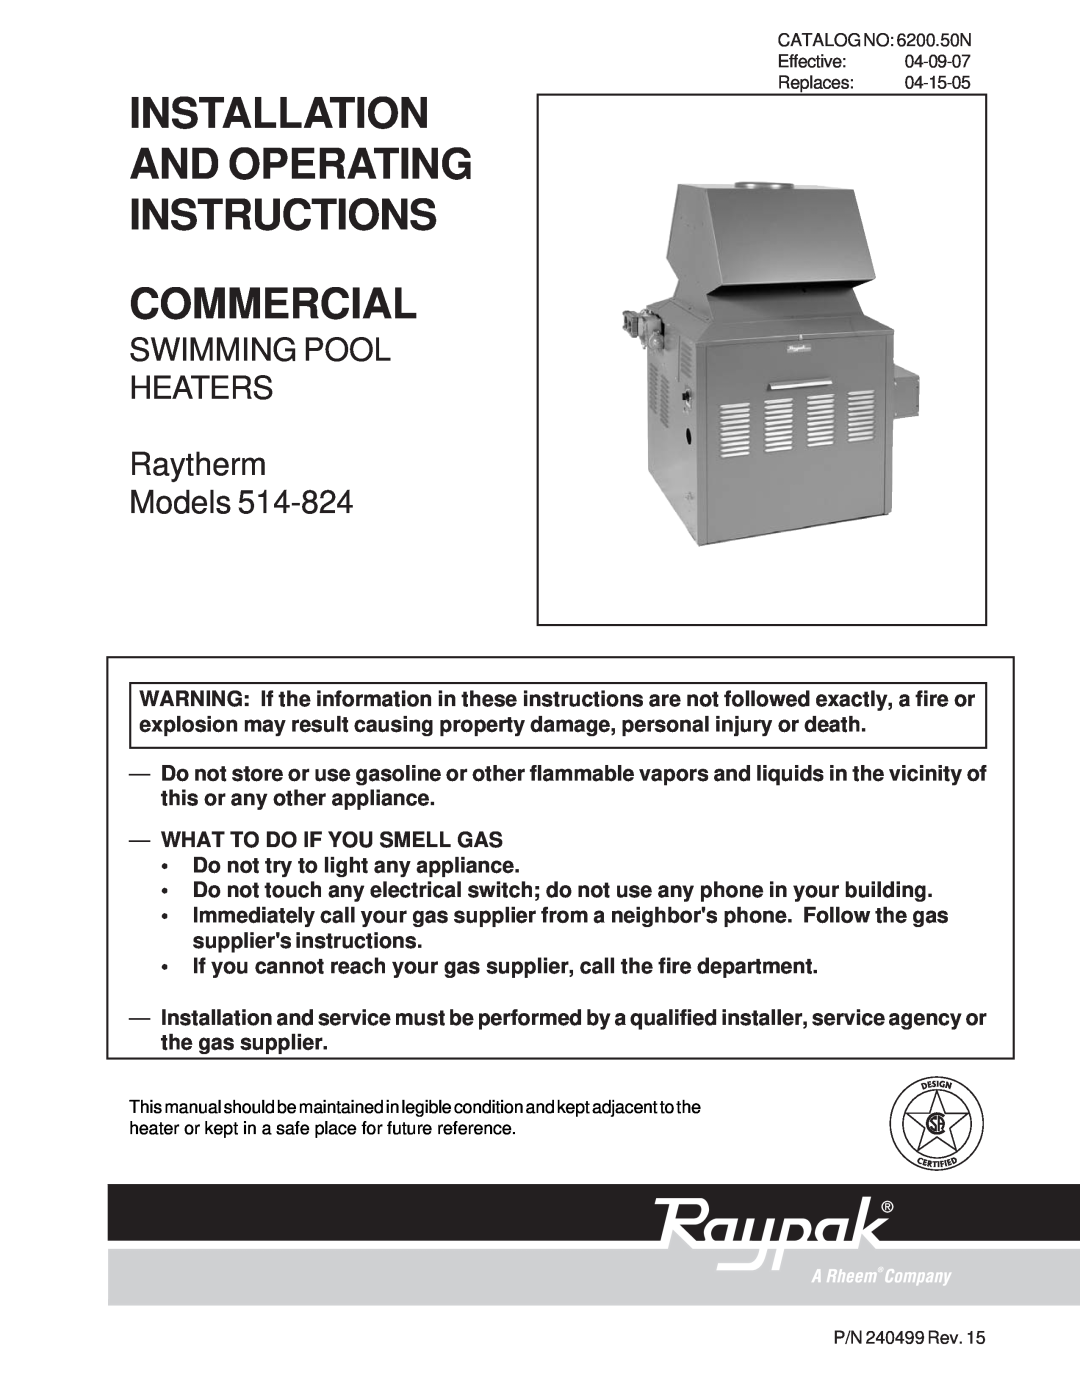 Raypak 514-824 manual SWIMMING POOL HEATERS Raytherm Models, Installation And Operating Instructions, Commercial 